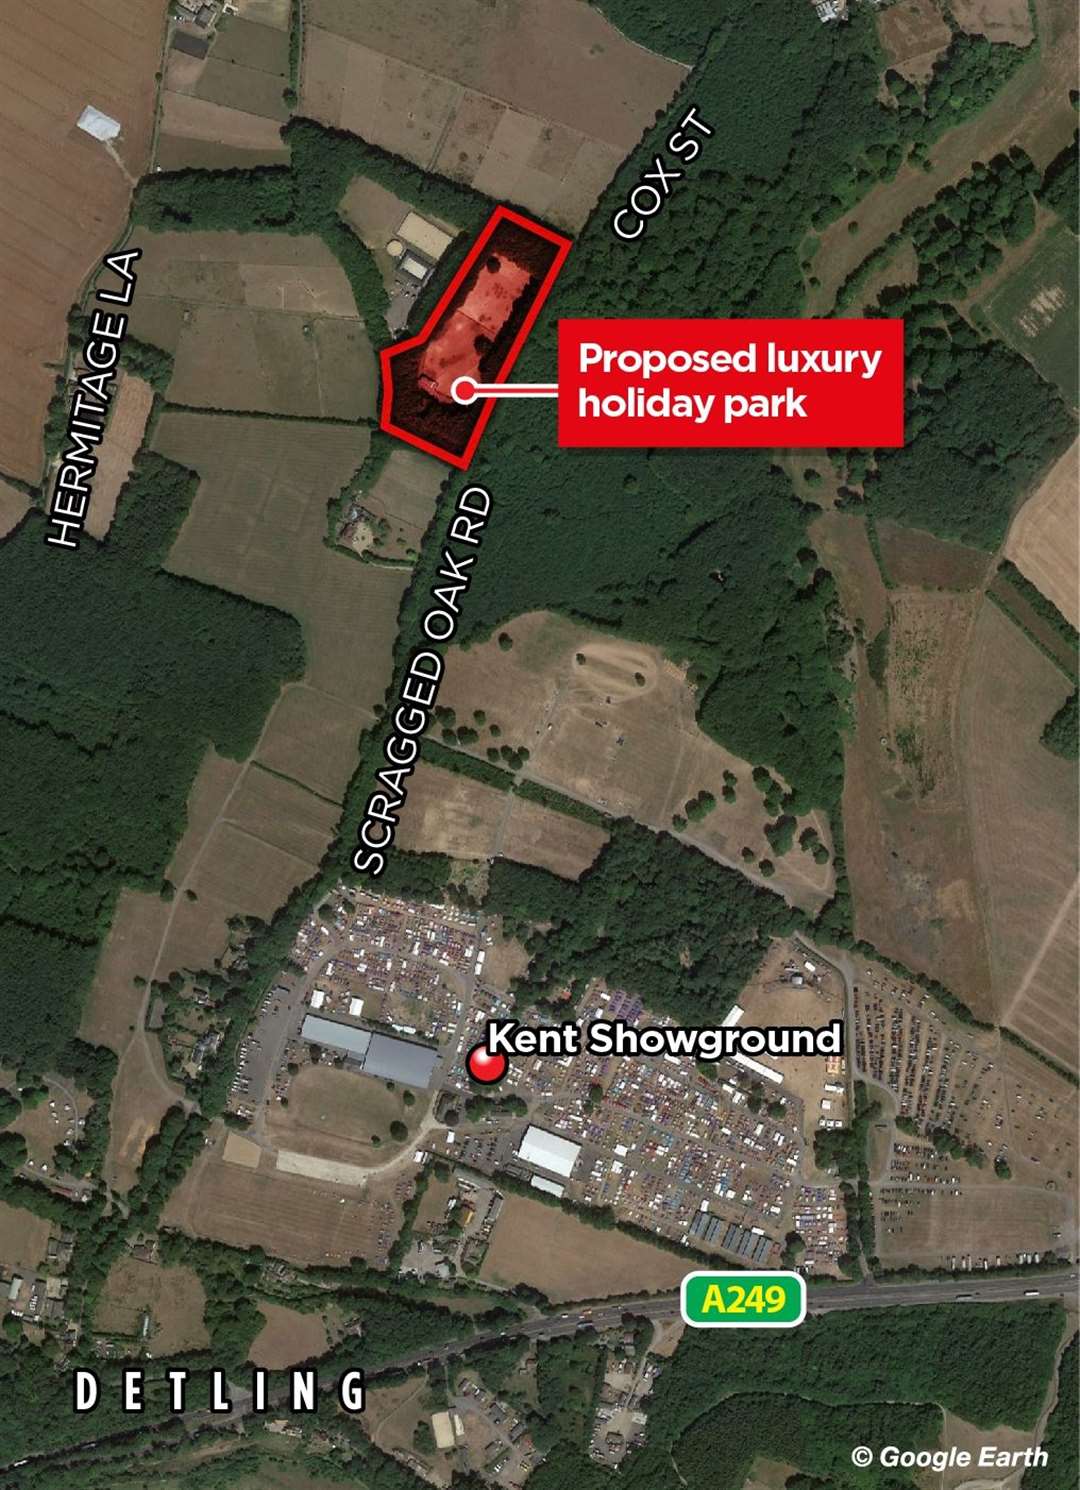 The setting of the proposed holiday park